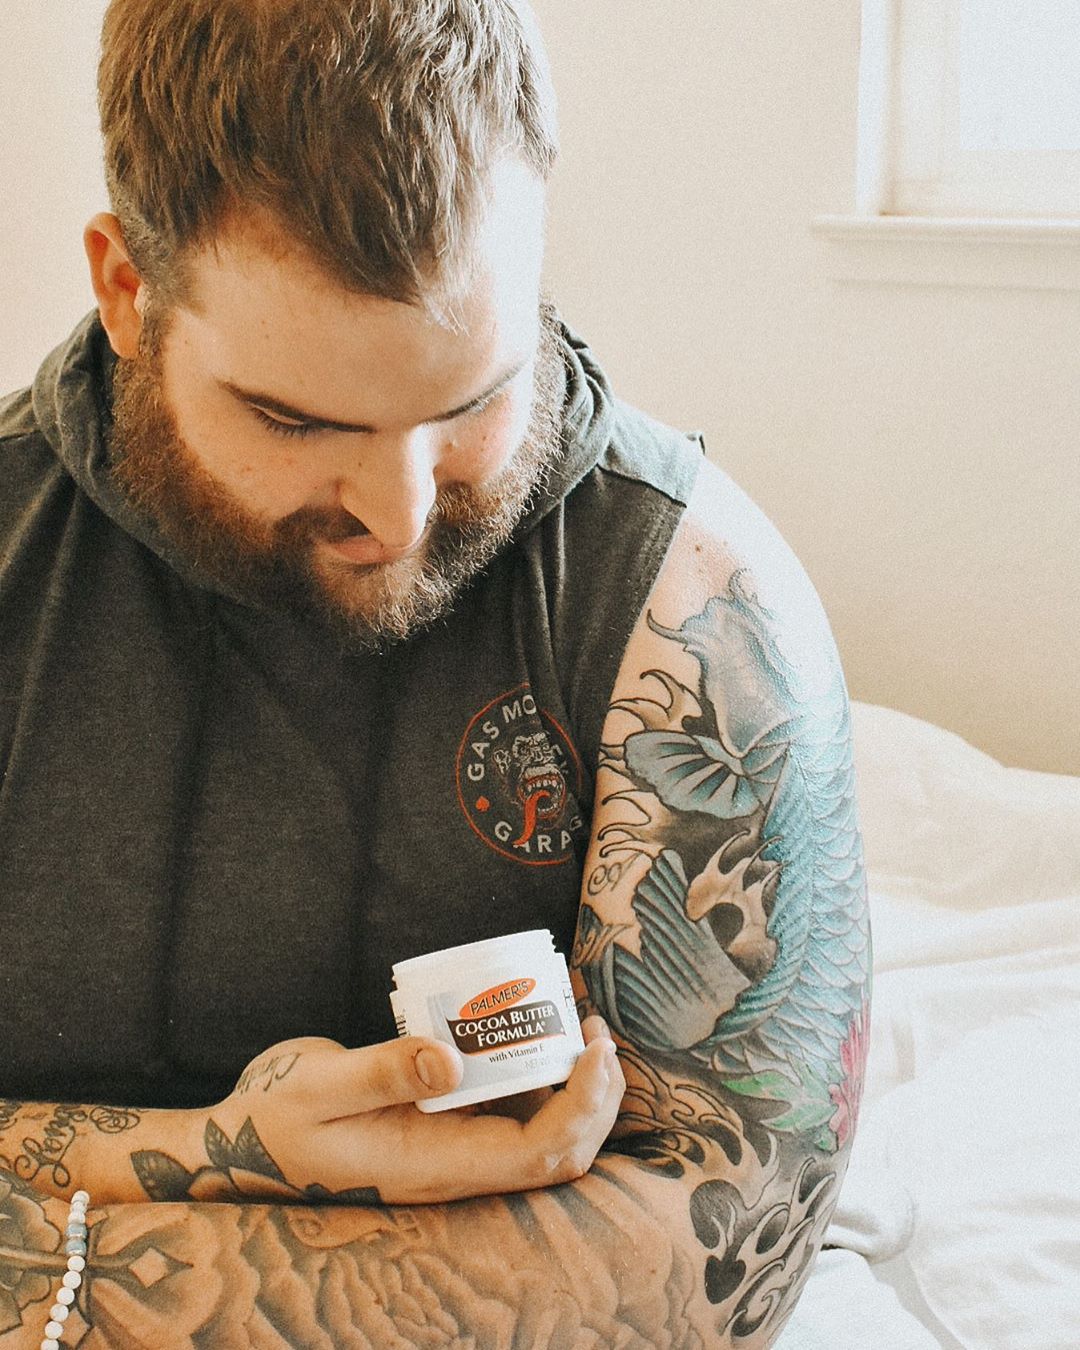 Is Cocoa Butter Good for Tattoos?